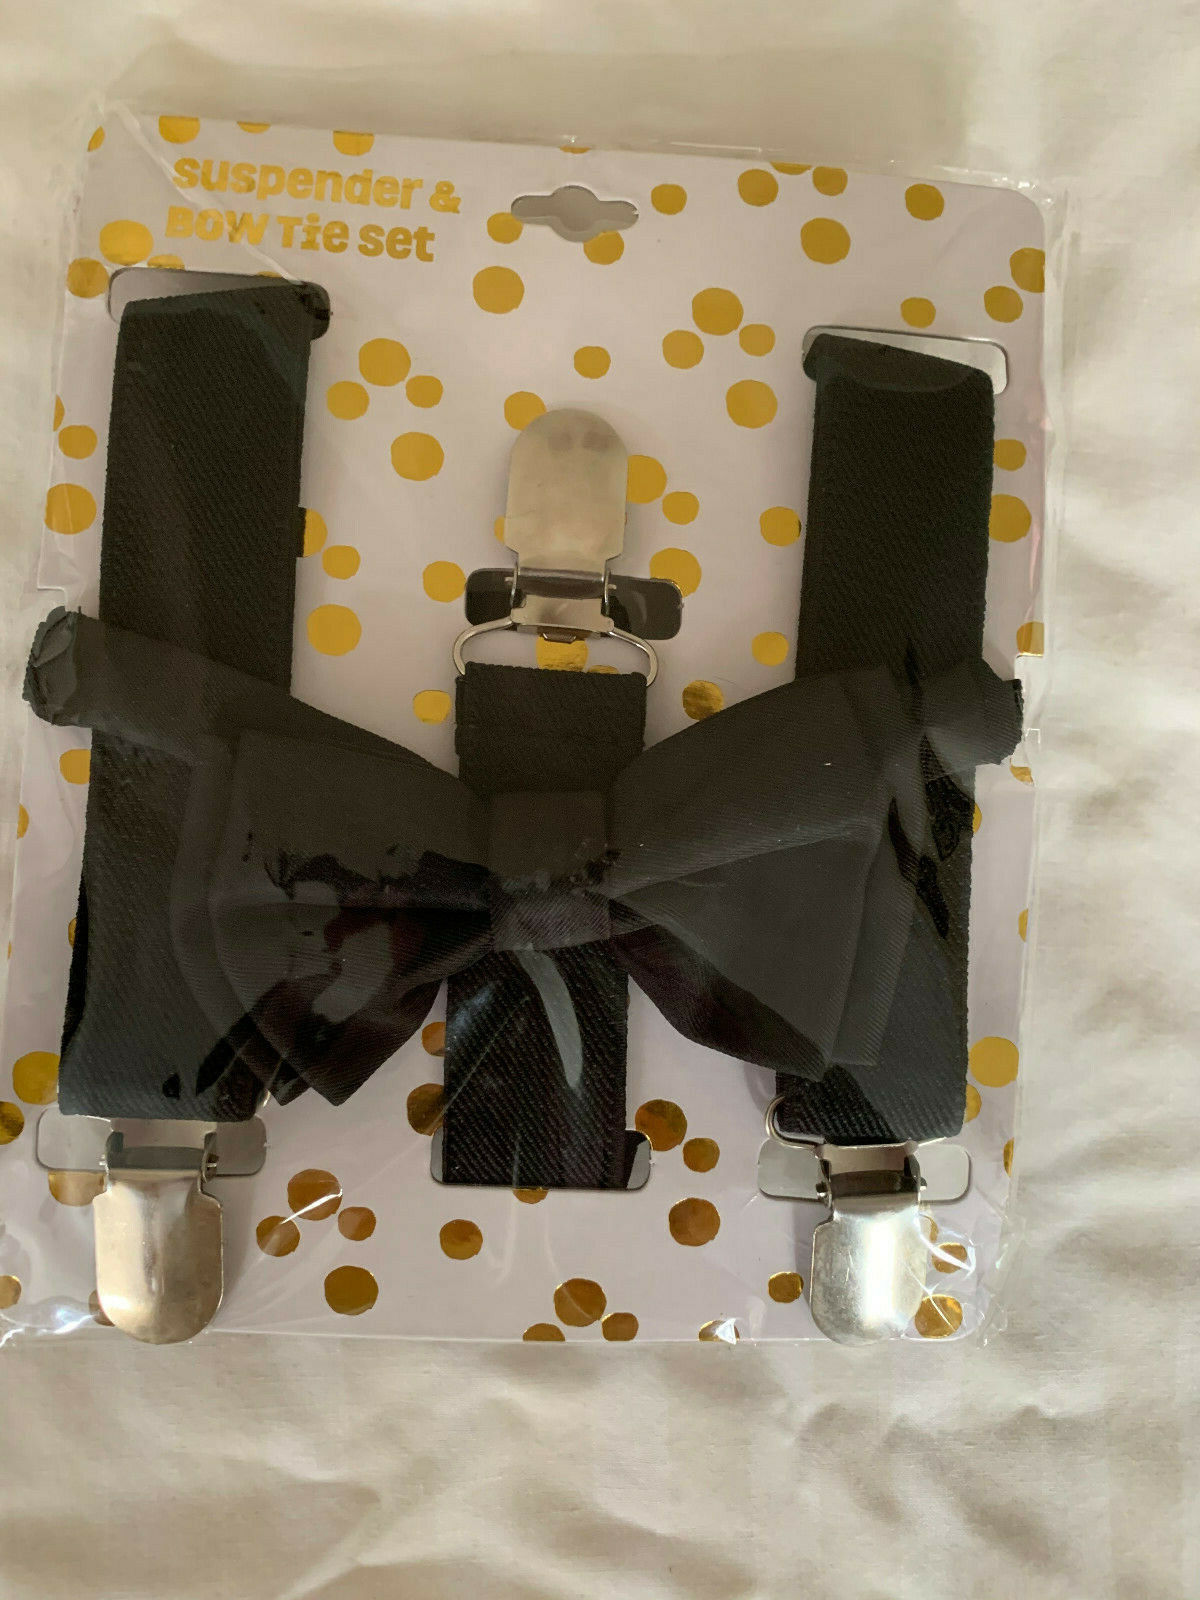 Boys Suspender & Bow Tie Set New Nwt  Black  Ages 2 - 6 Years